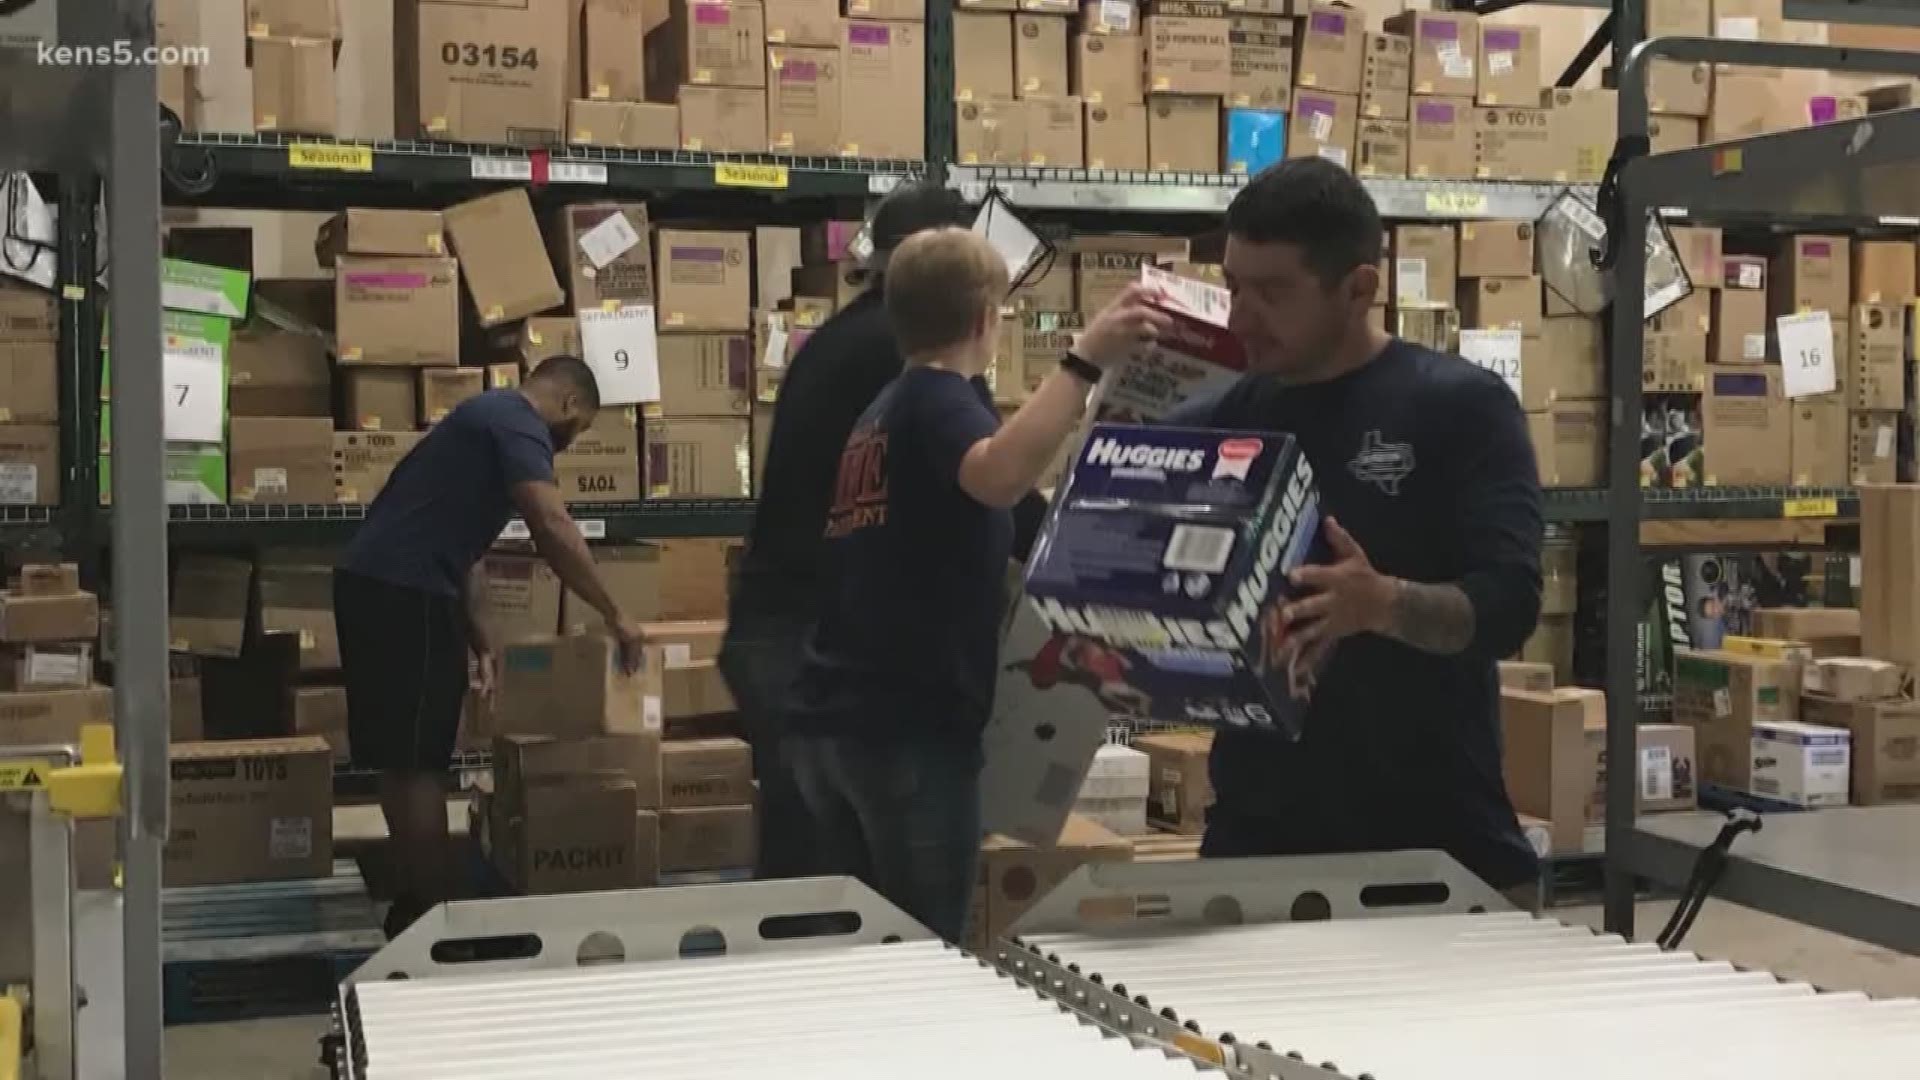 On their day off, firefighters stopped by Walmart to help employees unload 18-wheelers and restock shelves.